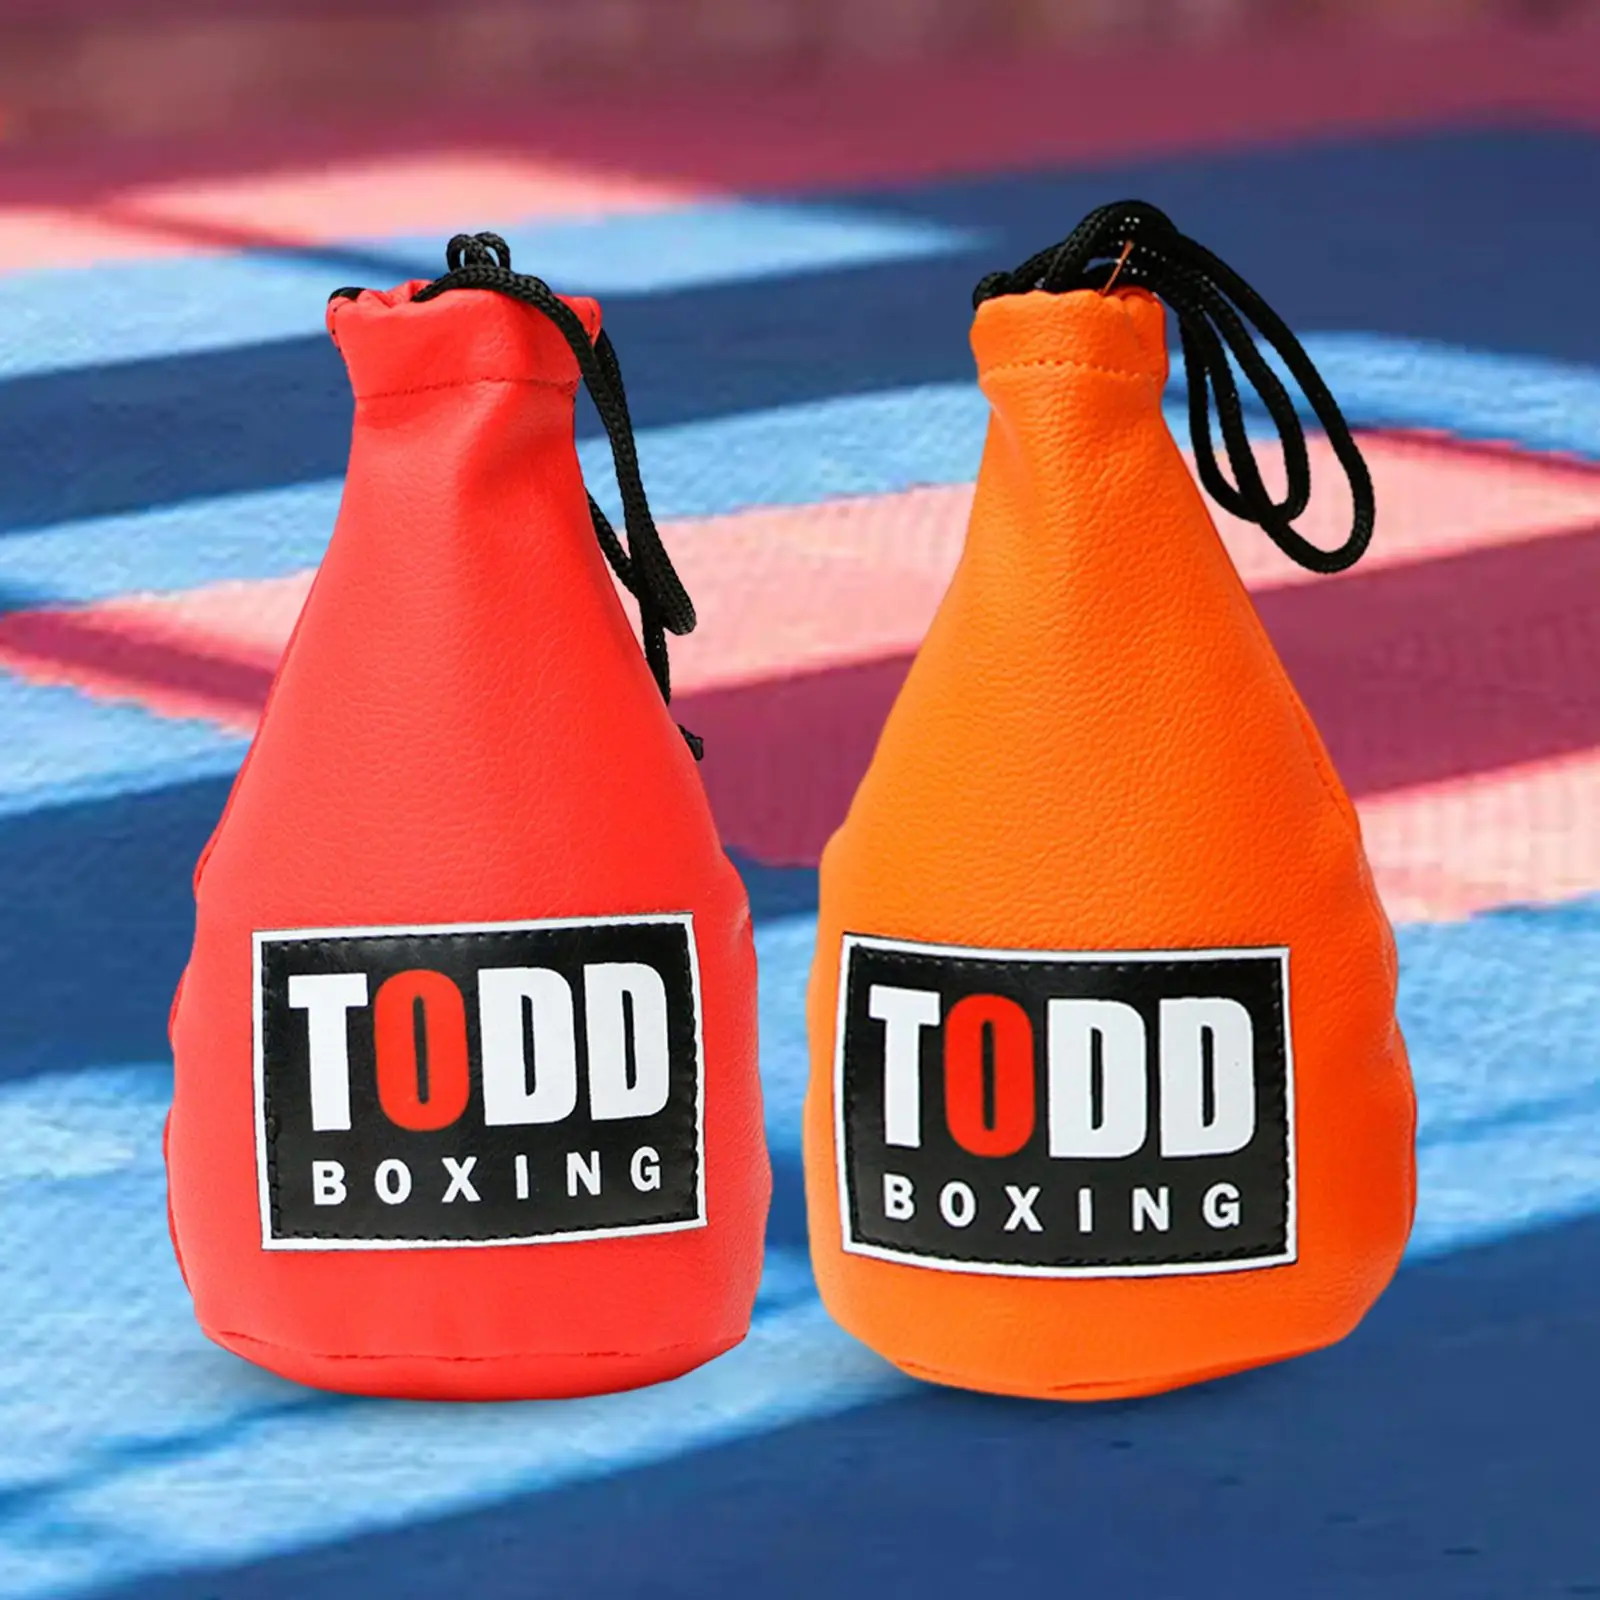 Boxing Punch Bag Reaction Training Gear Boxing Dodge Training Bag for Agility Hand Eye Coordination Fight Skill Reaction Karate